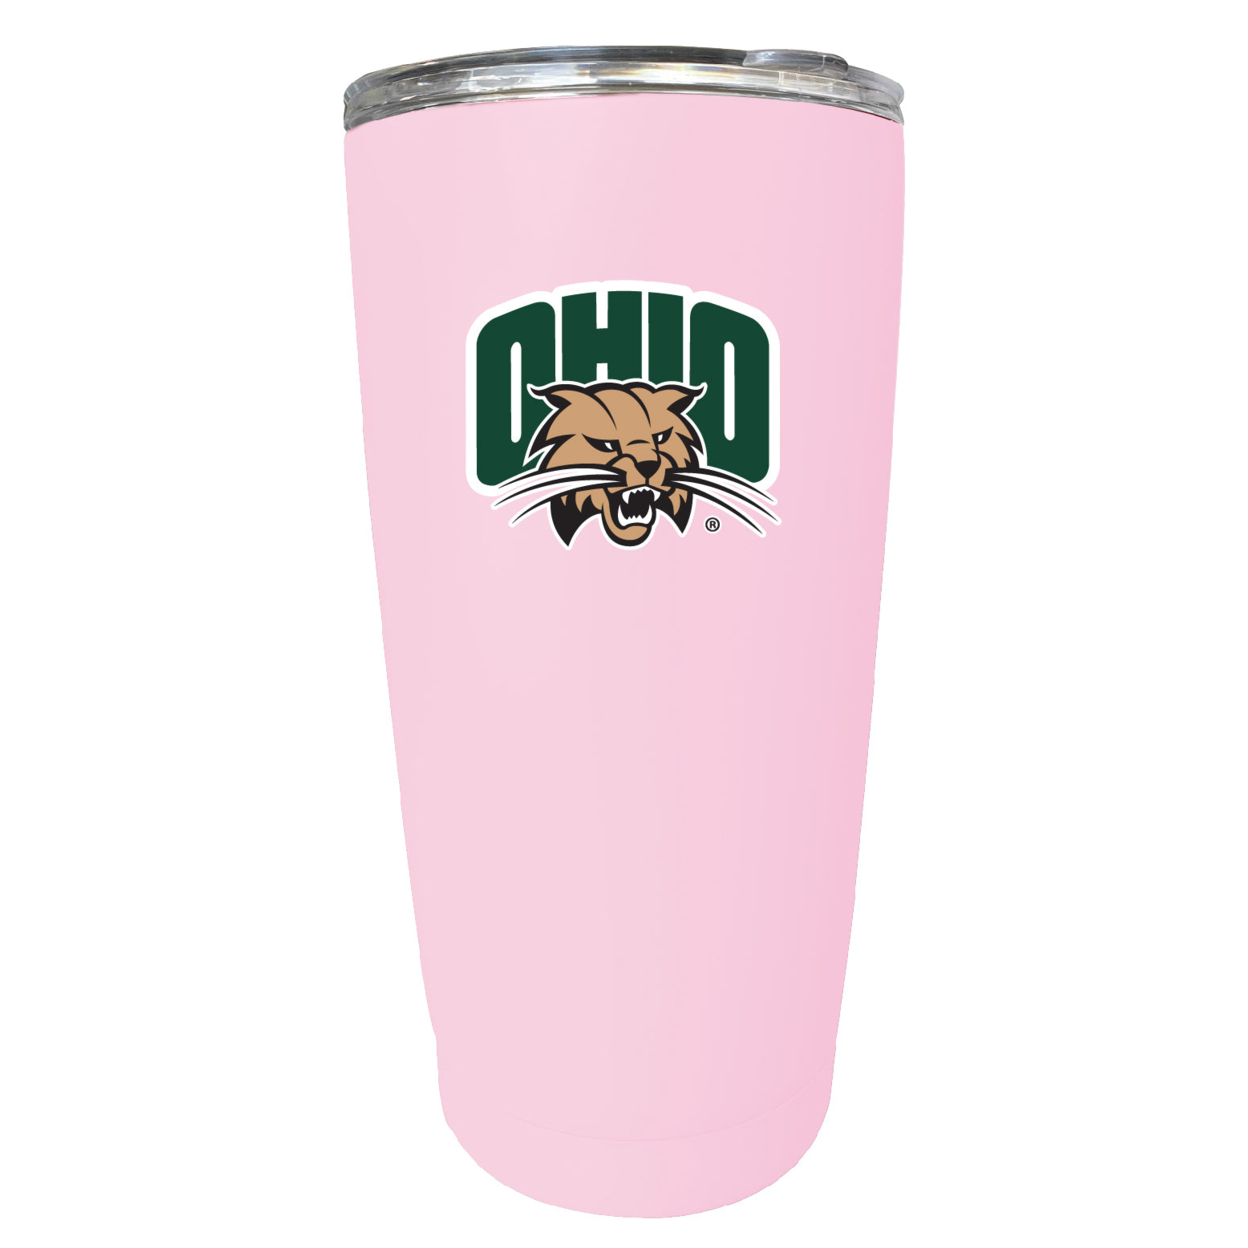 Ohio University 16 Oz Stainless Steel Insulated Tumbler - Pink